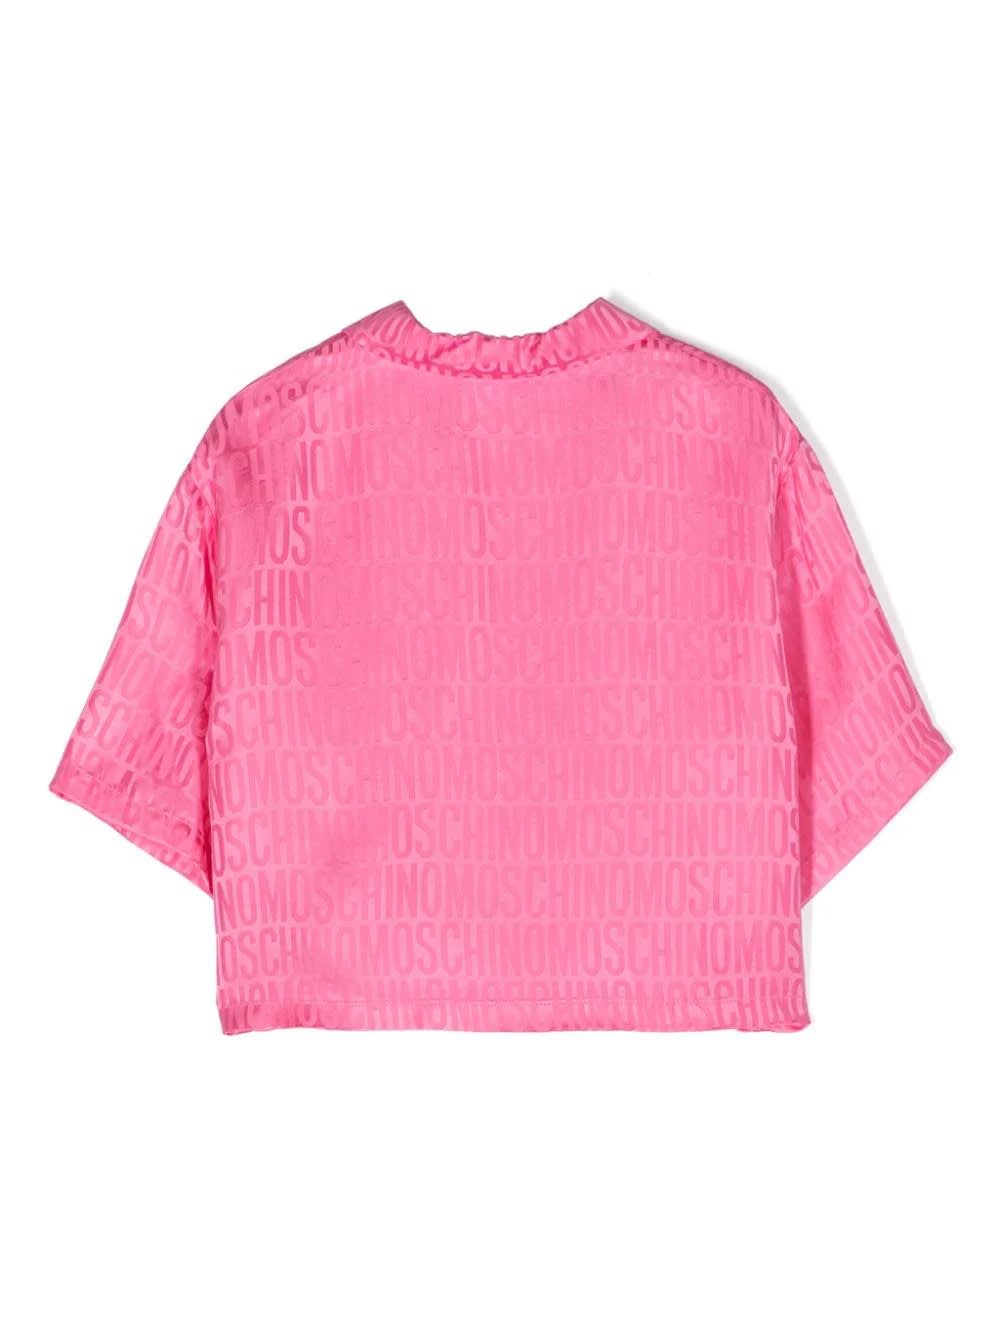 Shop Moschino Pink Shirt With All-over Jacquard Logo